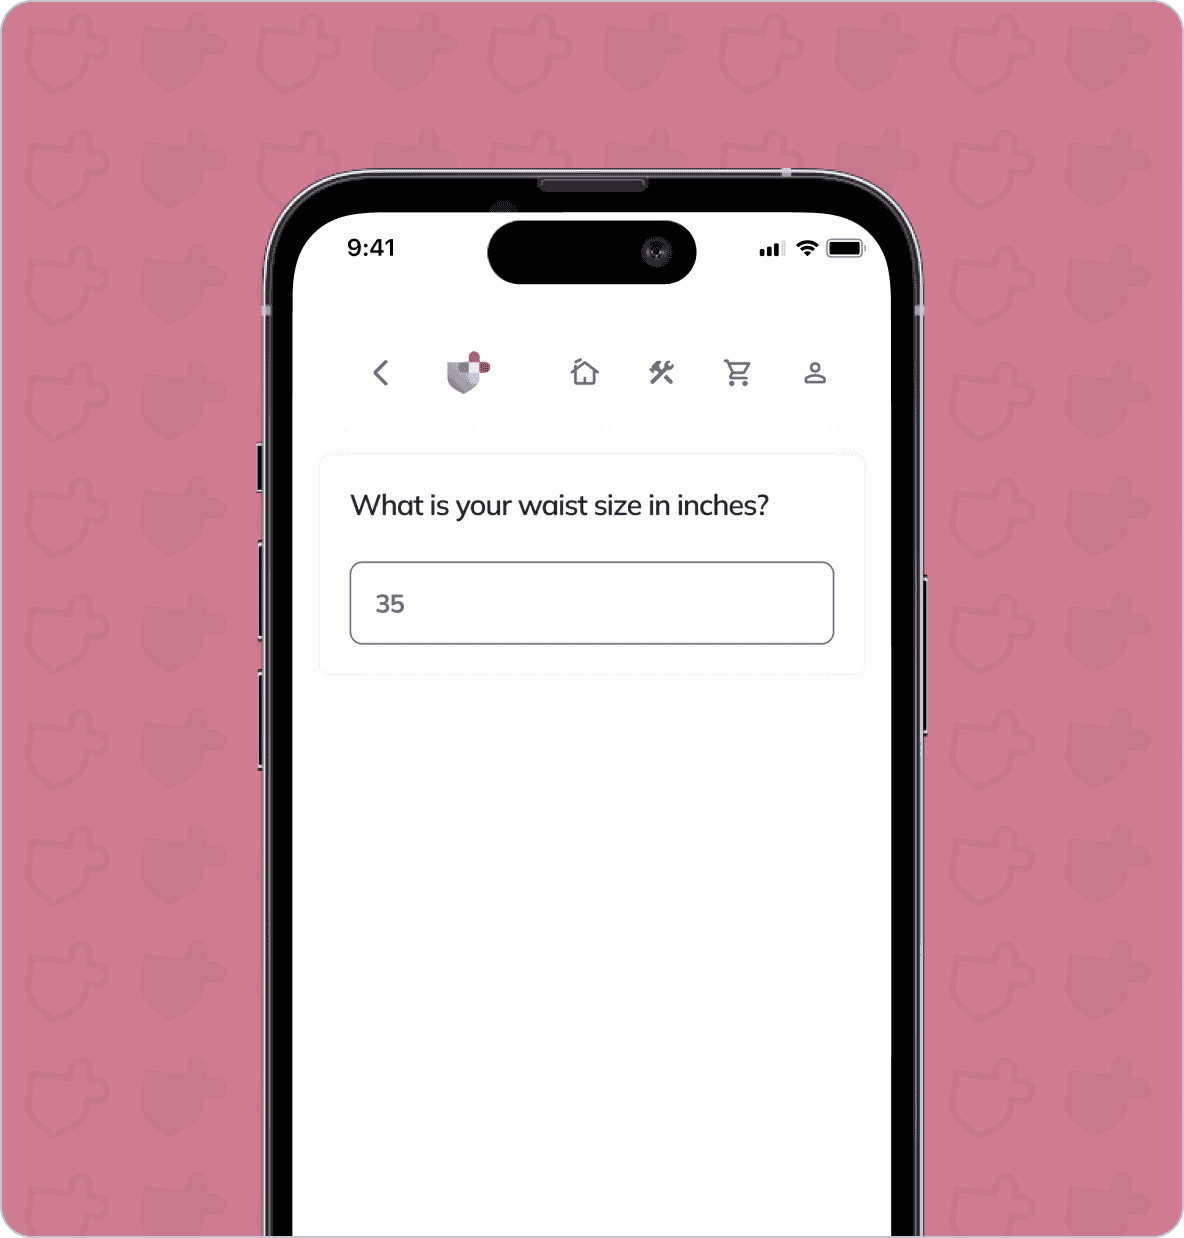 A smartphone screen displaying a question, "What is your waist size in inches?" with an input box filled with the number 35. The background is pink with a repeated shield pattern.